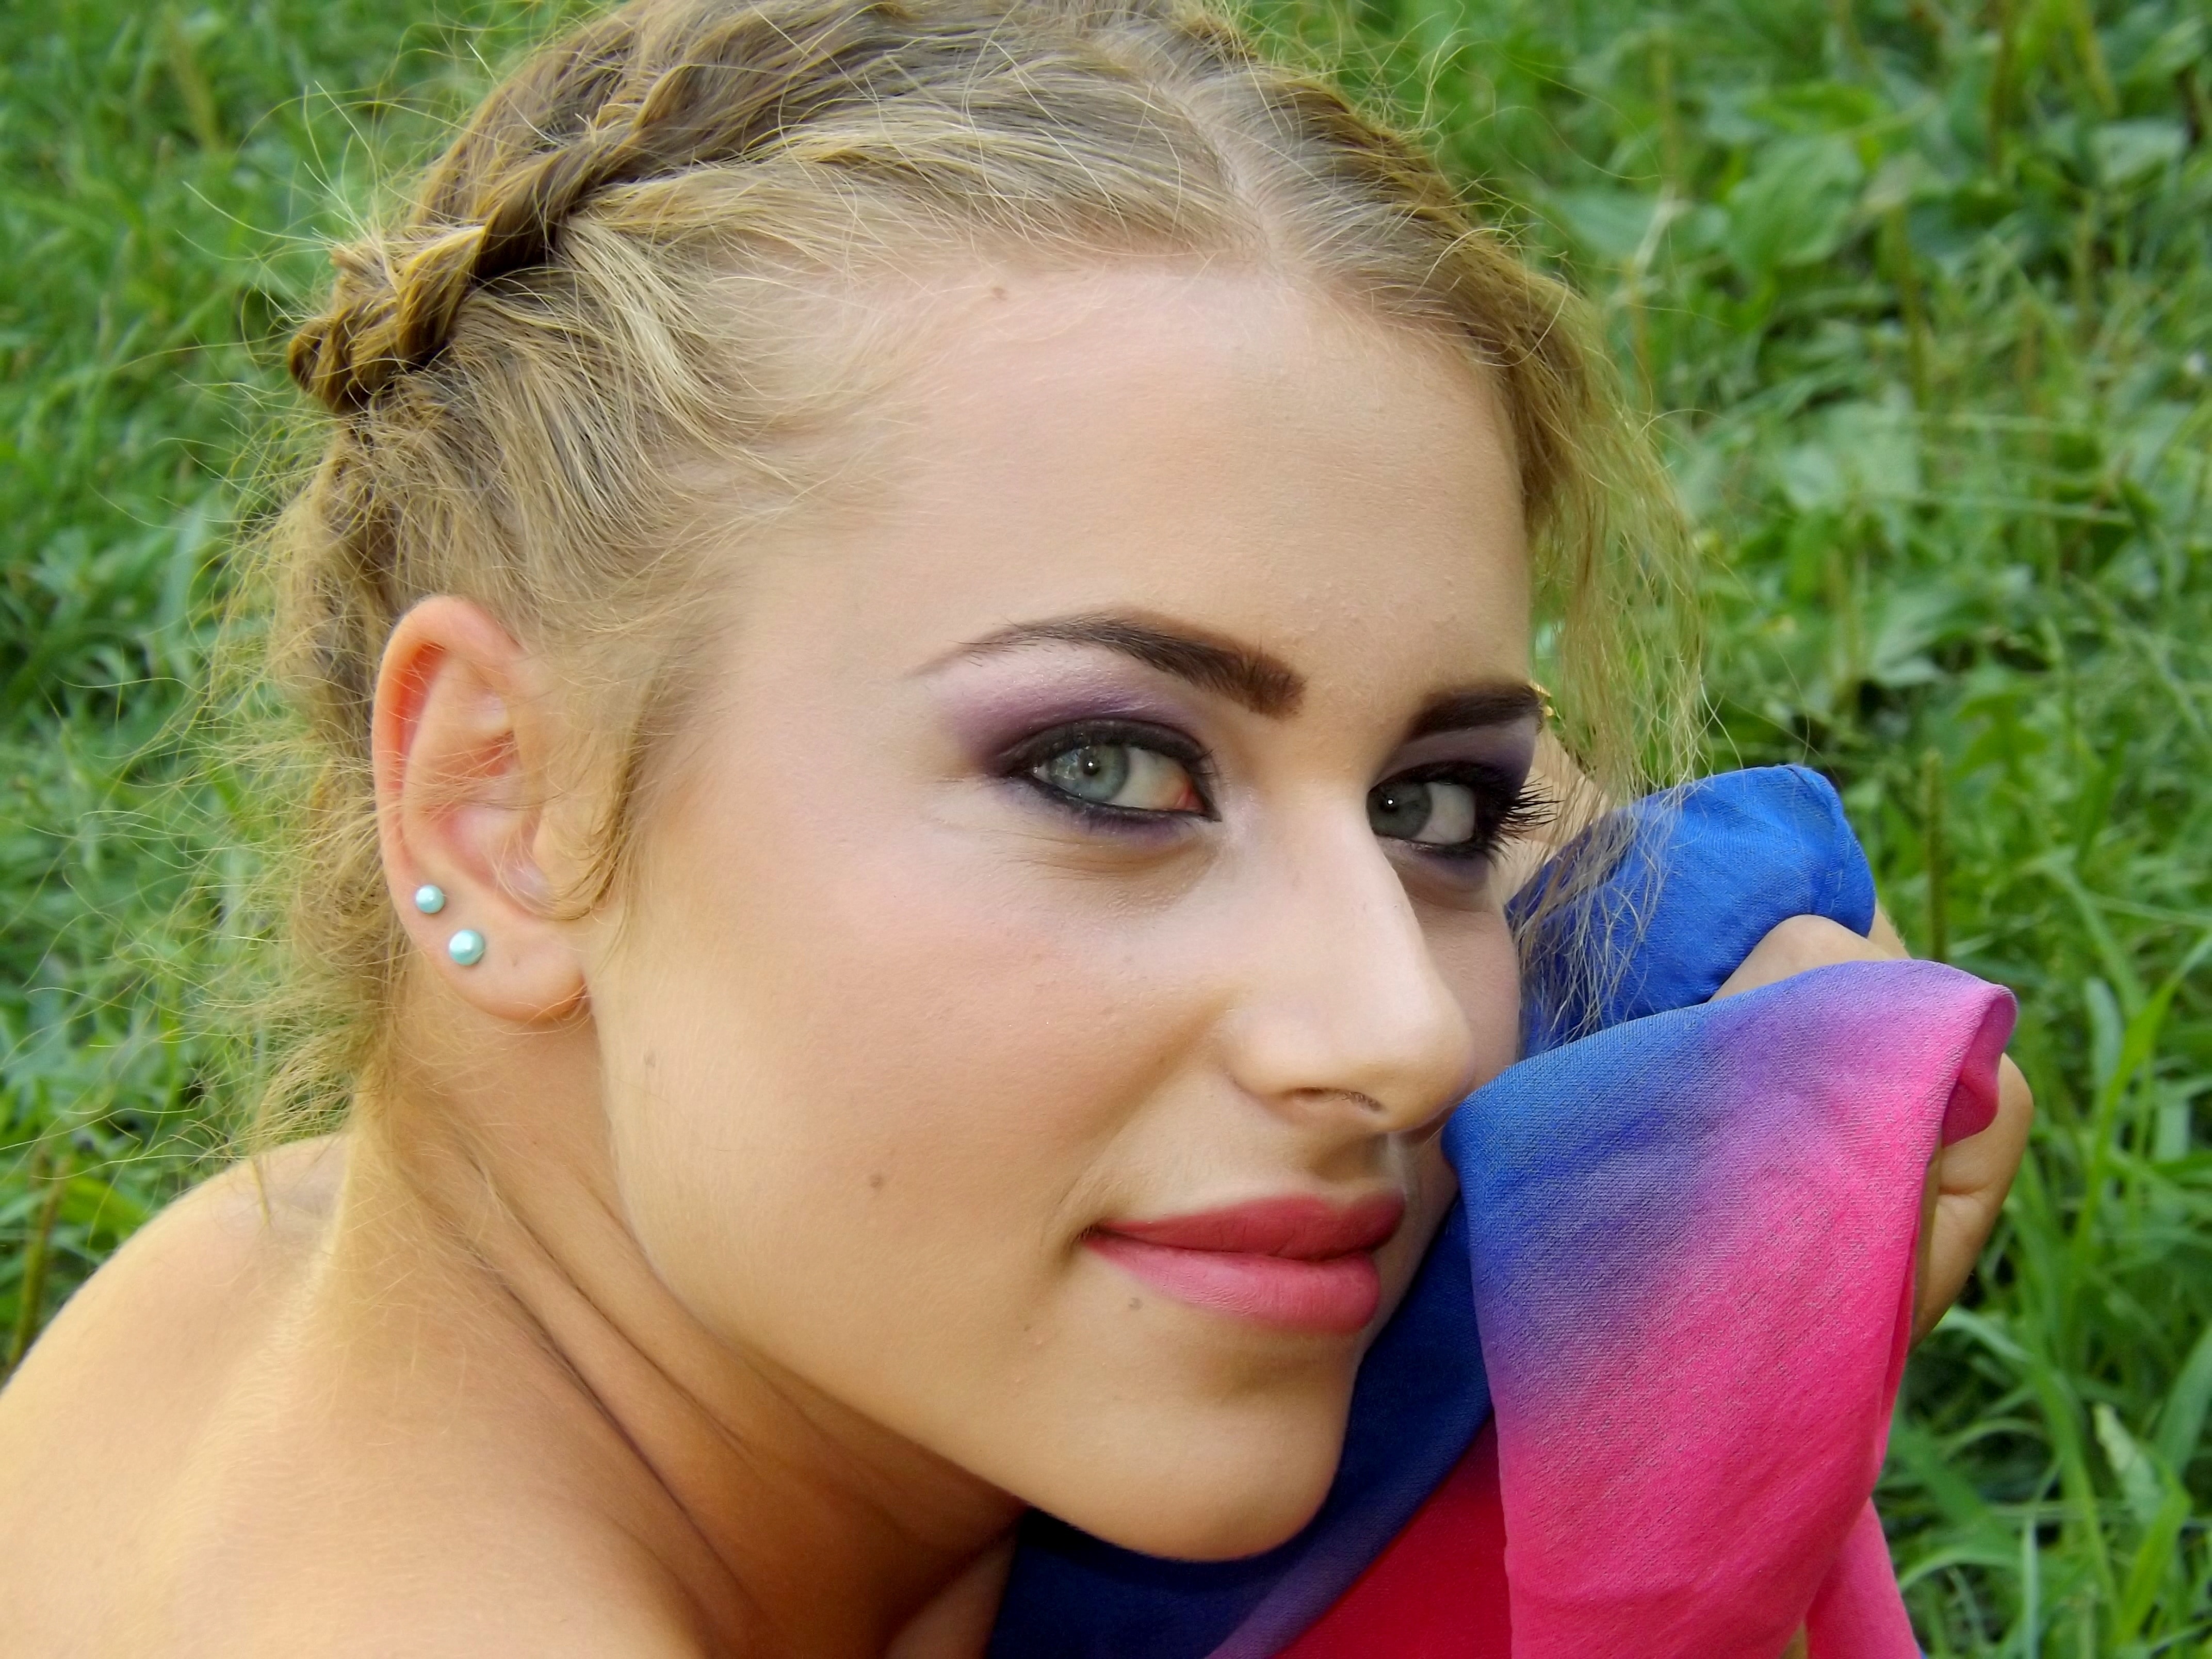 woman holding blue and pink towel with stud earrings